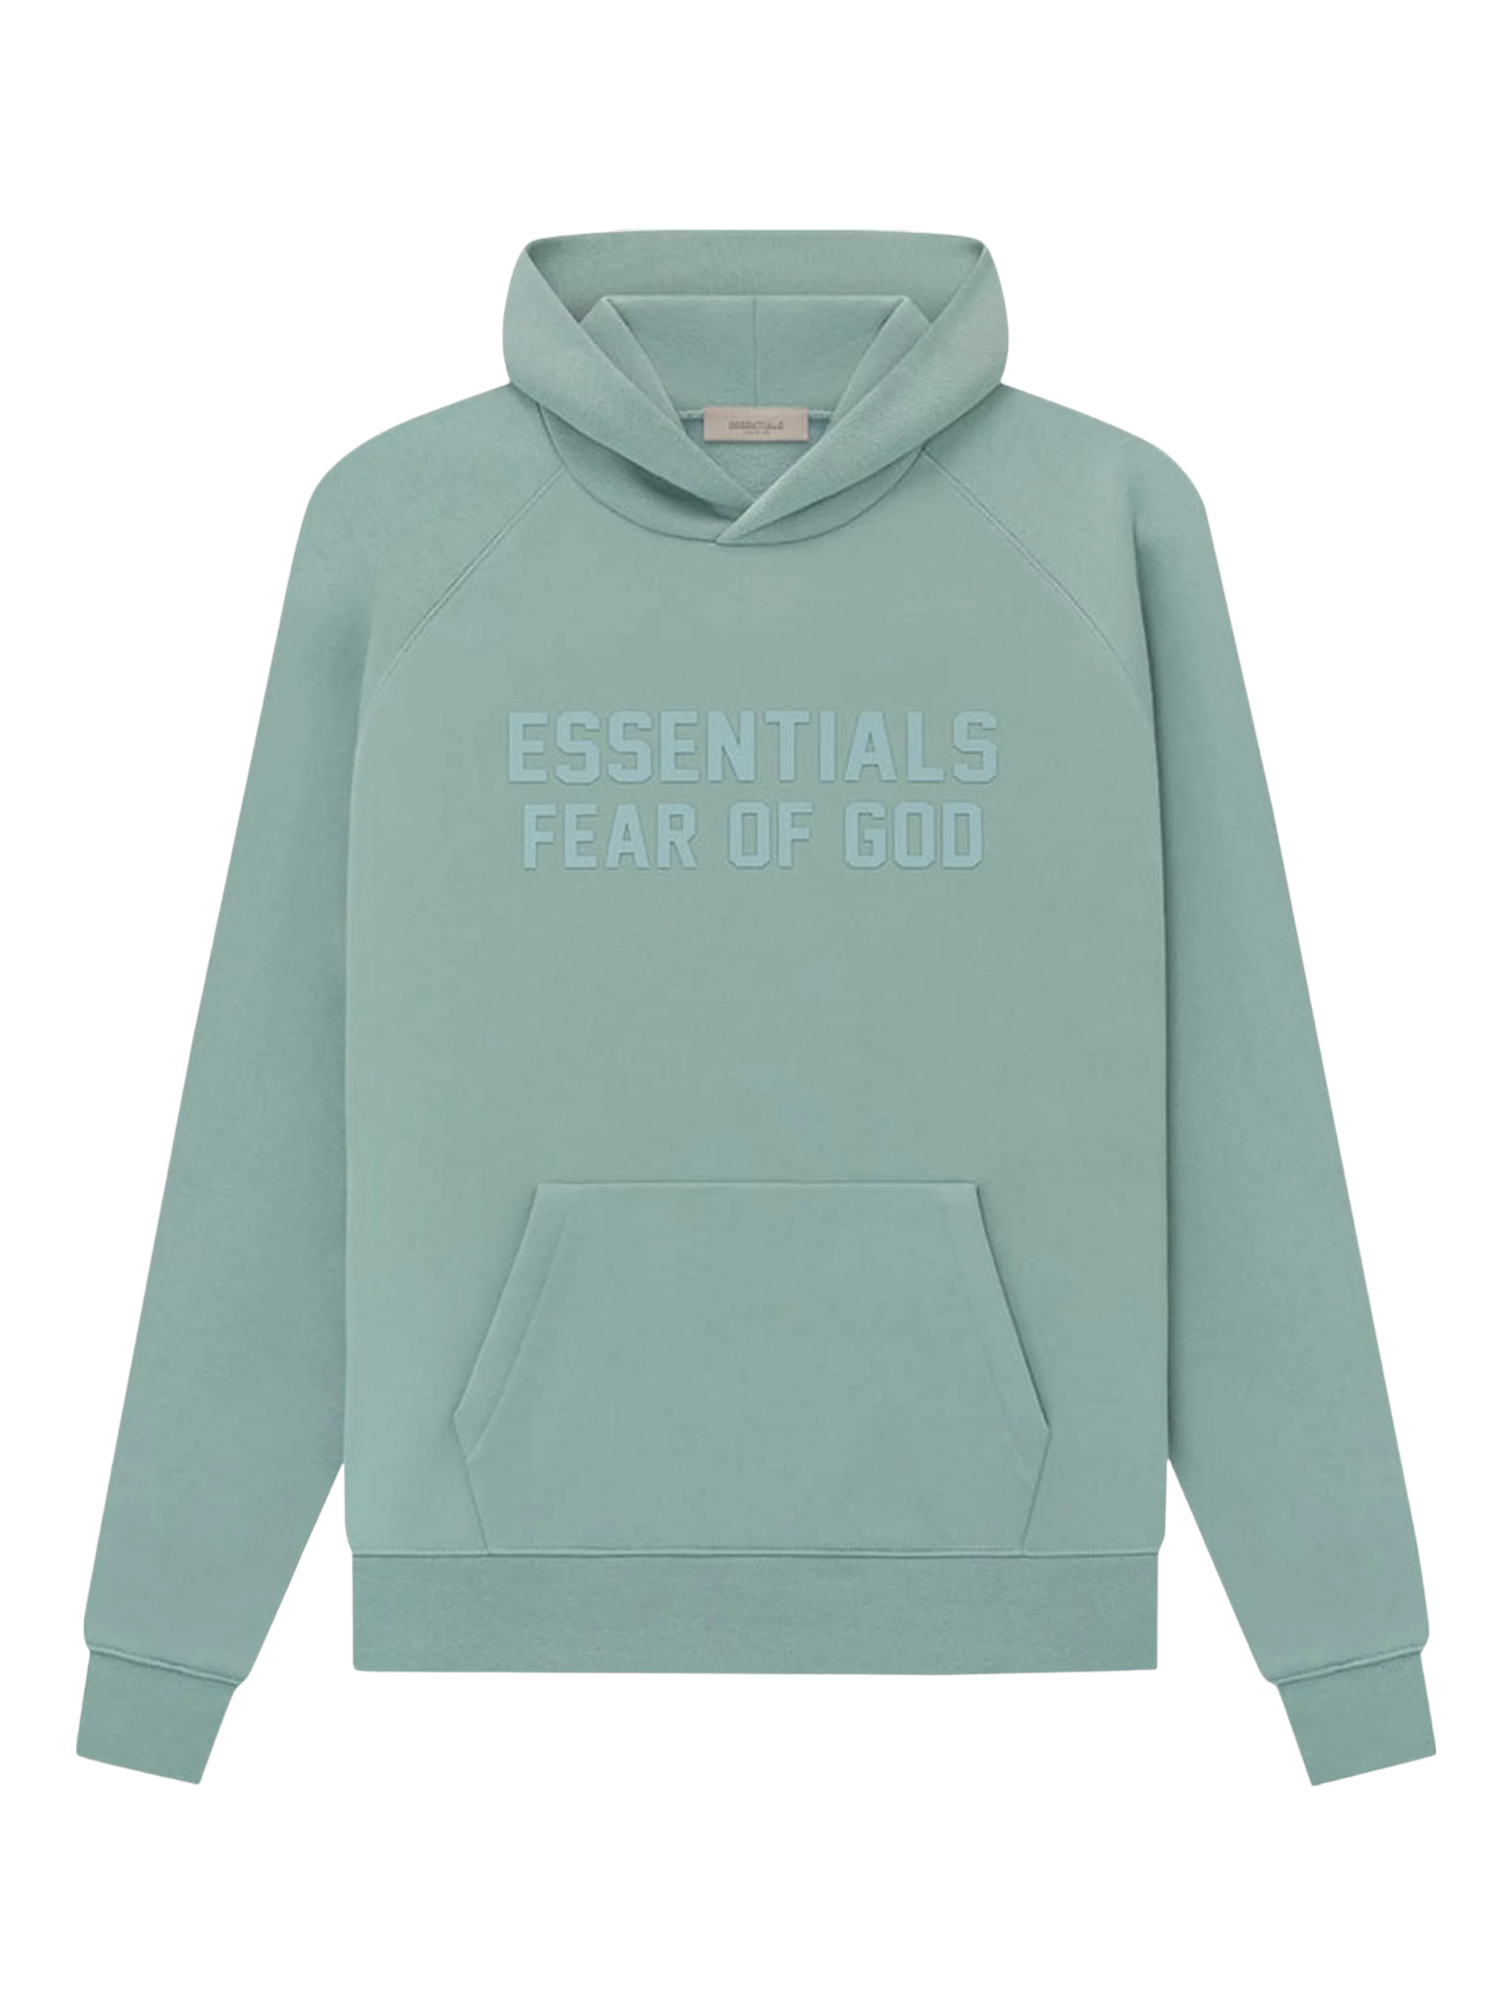 Essentials Fear of God Sycamore Fleece Hoodie SS23 — Genuine Design Luxury Consignment for Men. New & Pre-Owned Clothing, Shoes, & Accessories. Calgary, Canada